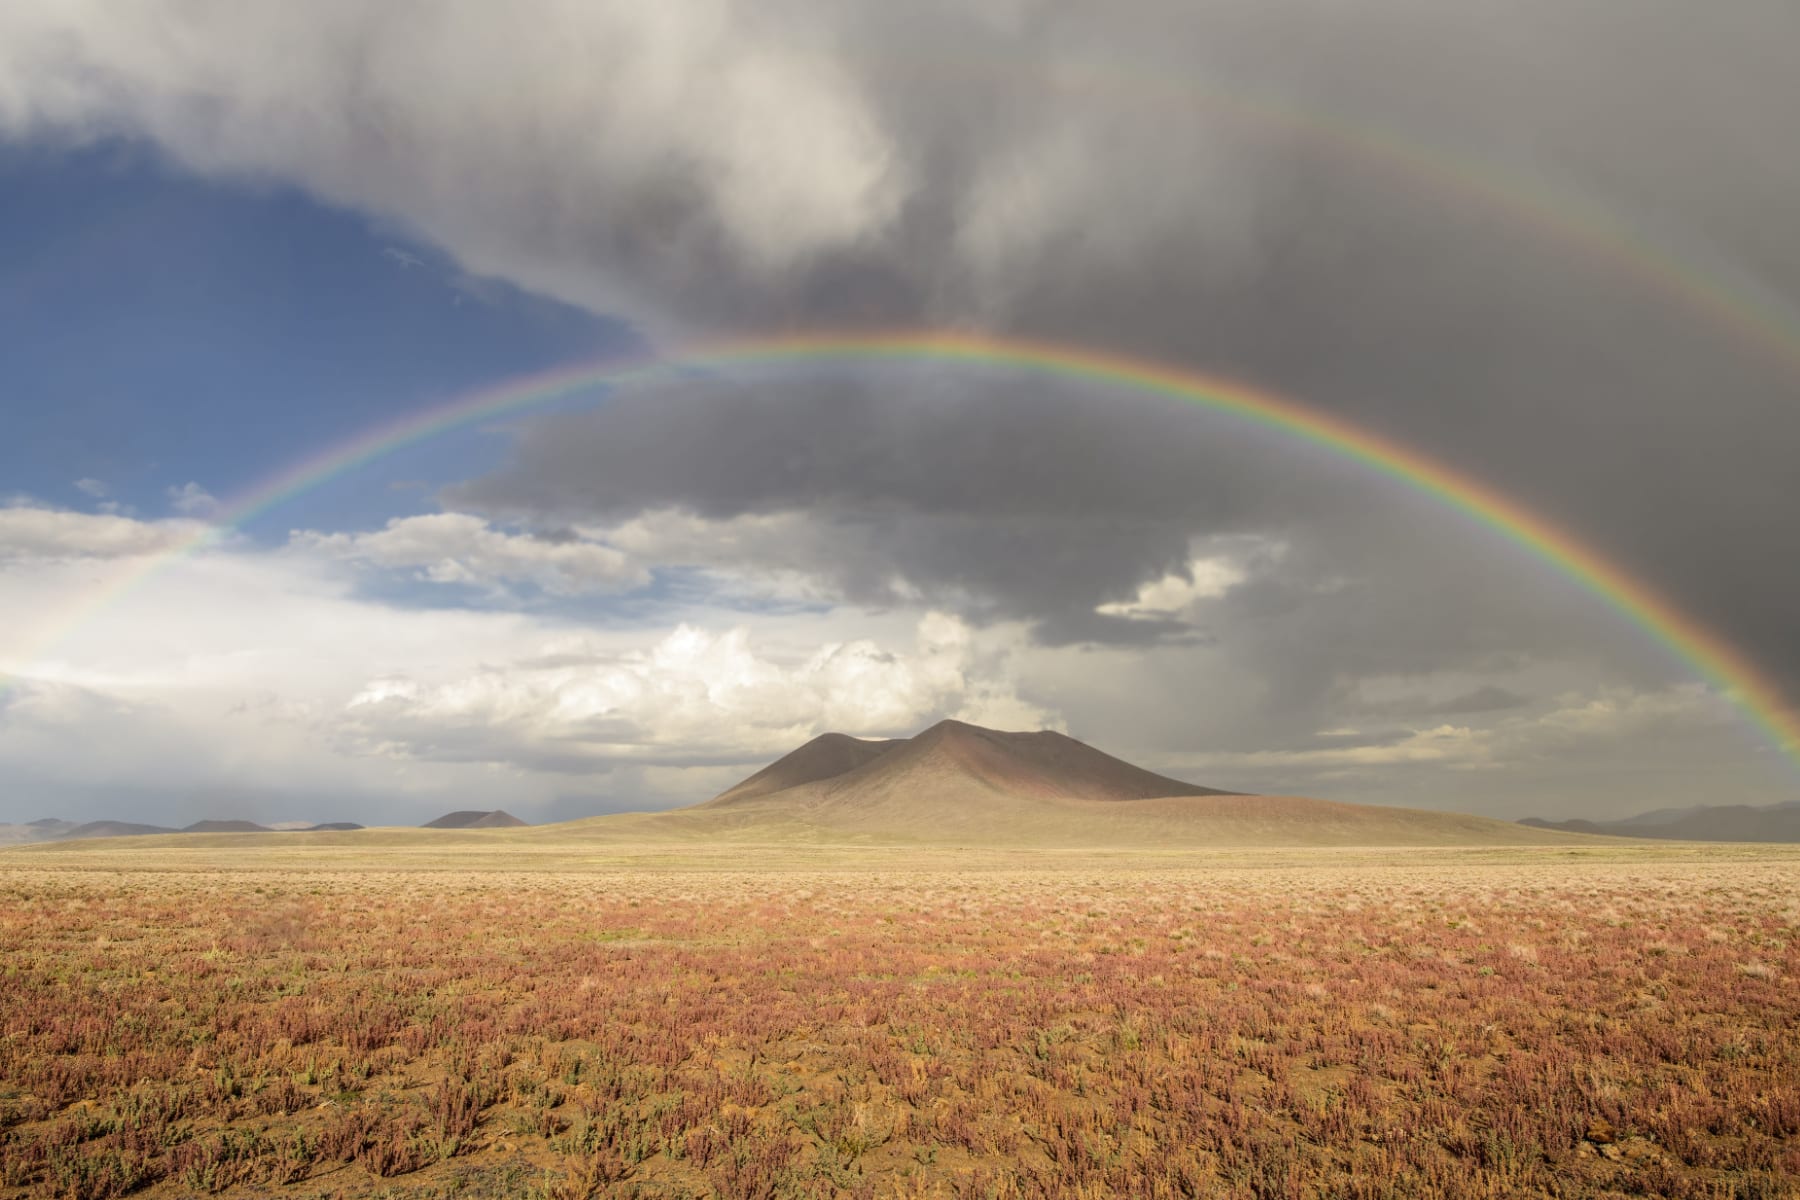 A volcanic crater with a rainbow overhead.